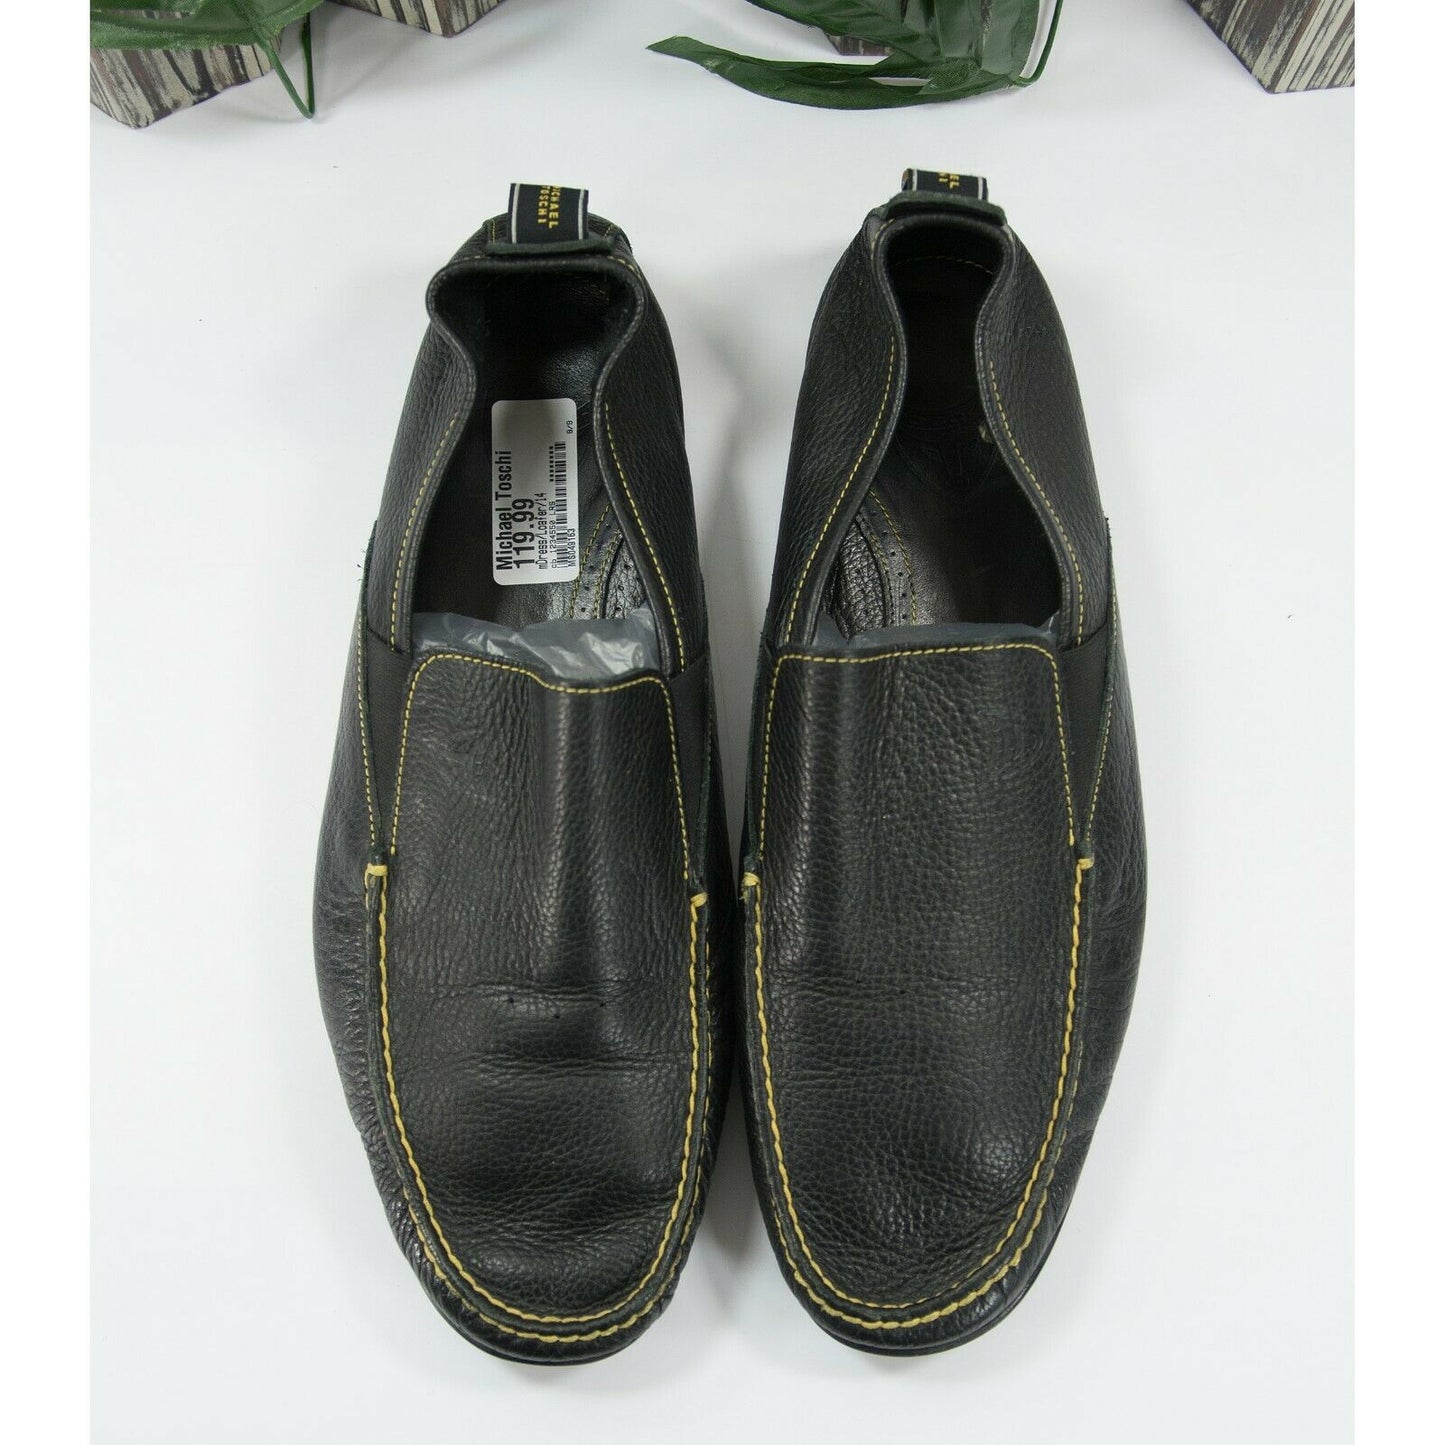 Michael Toschi Black Italian Leather Moccasin Loafer Shoes Size 14